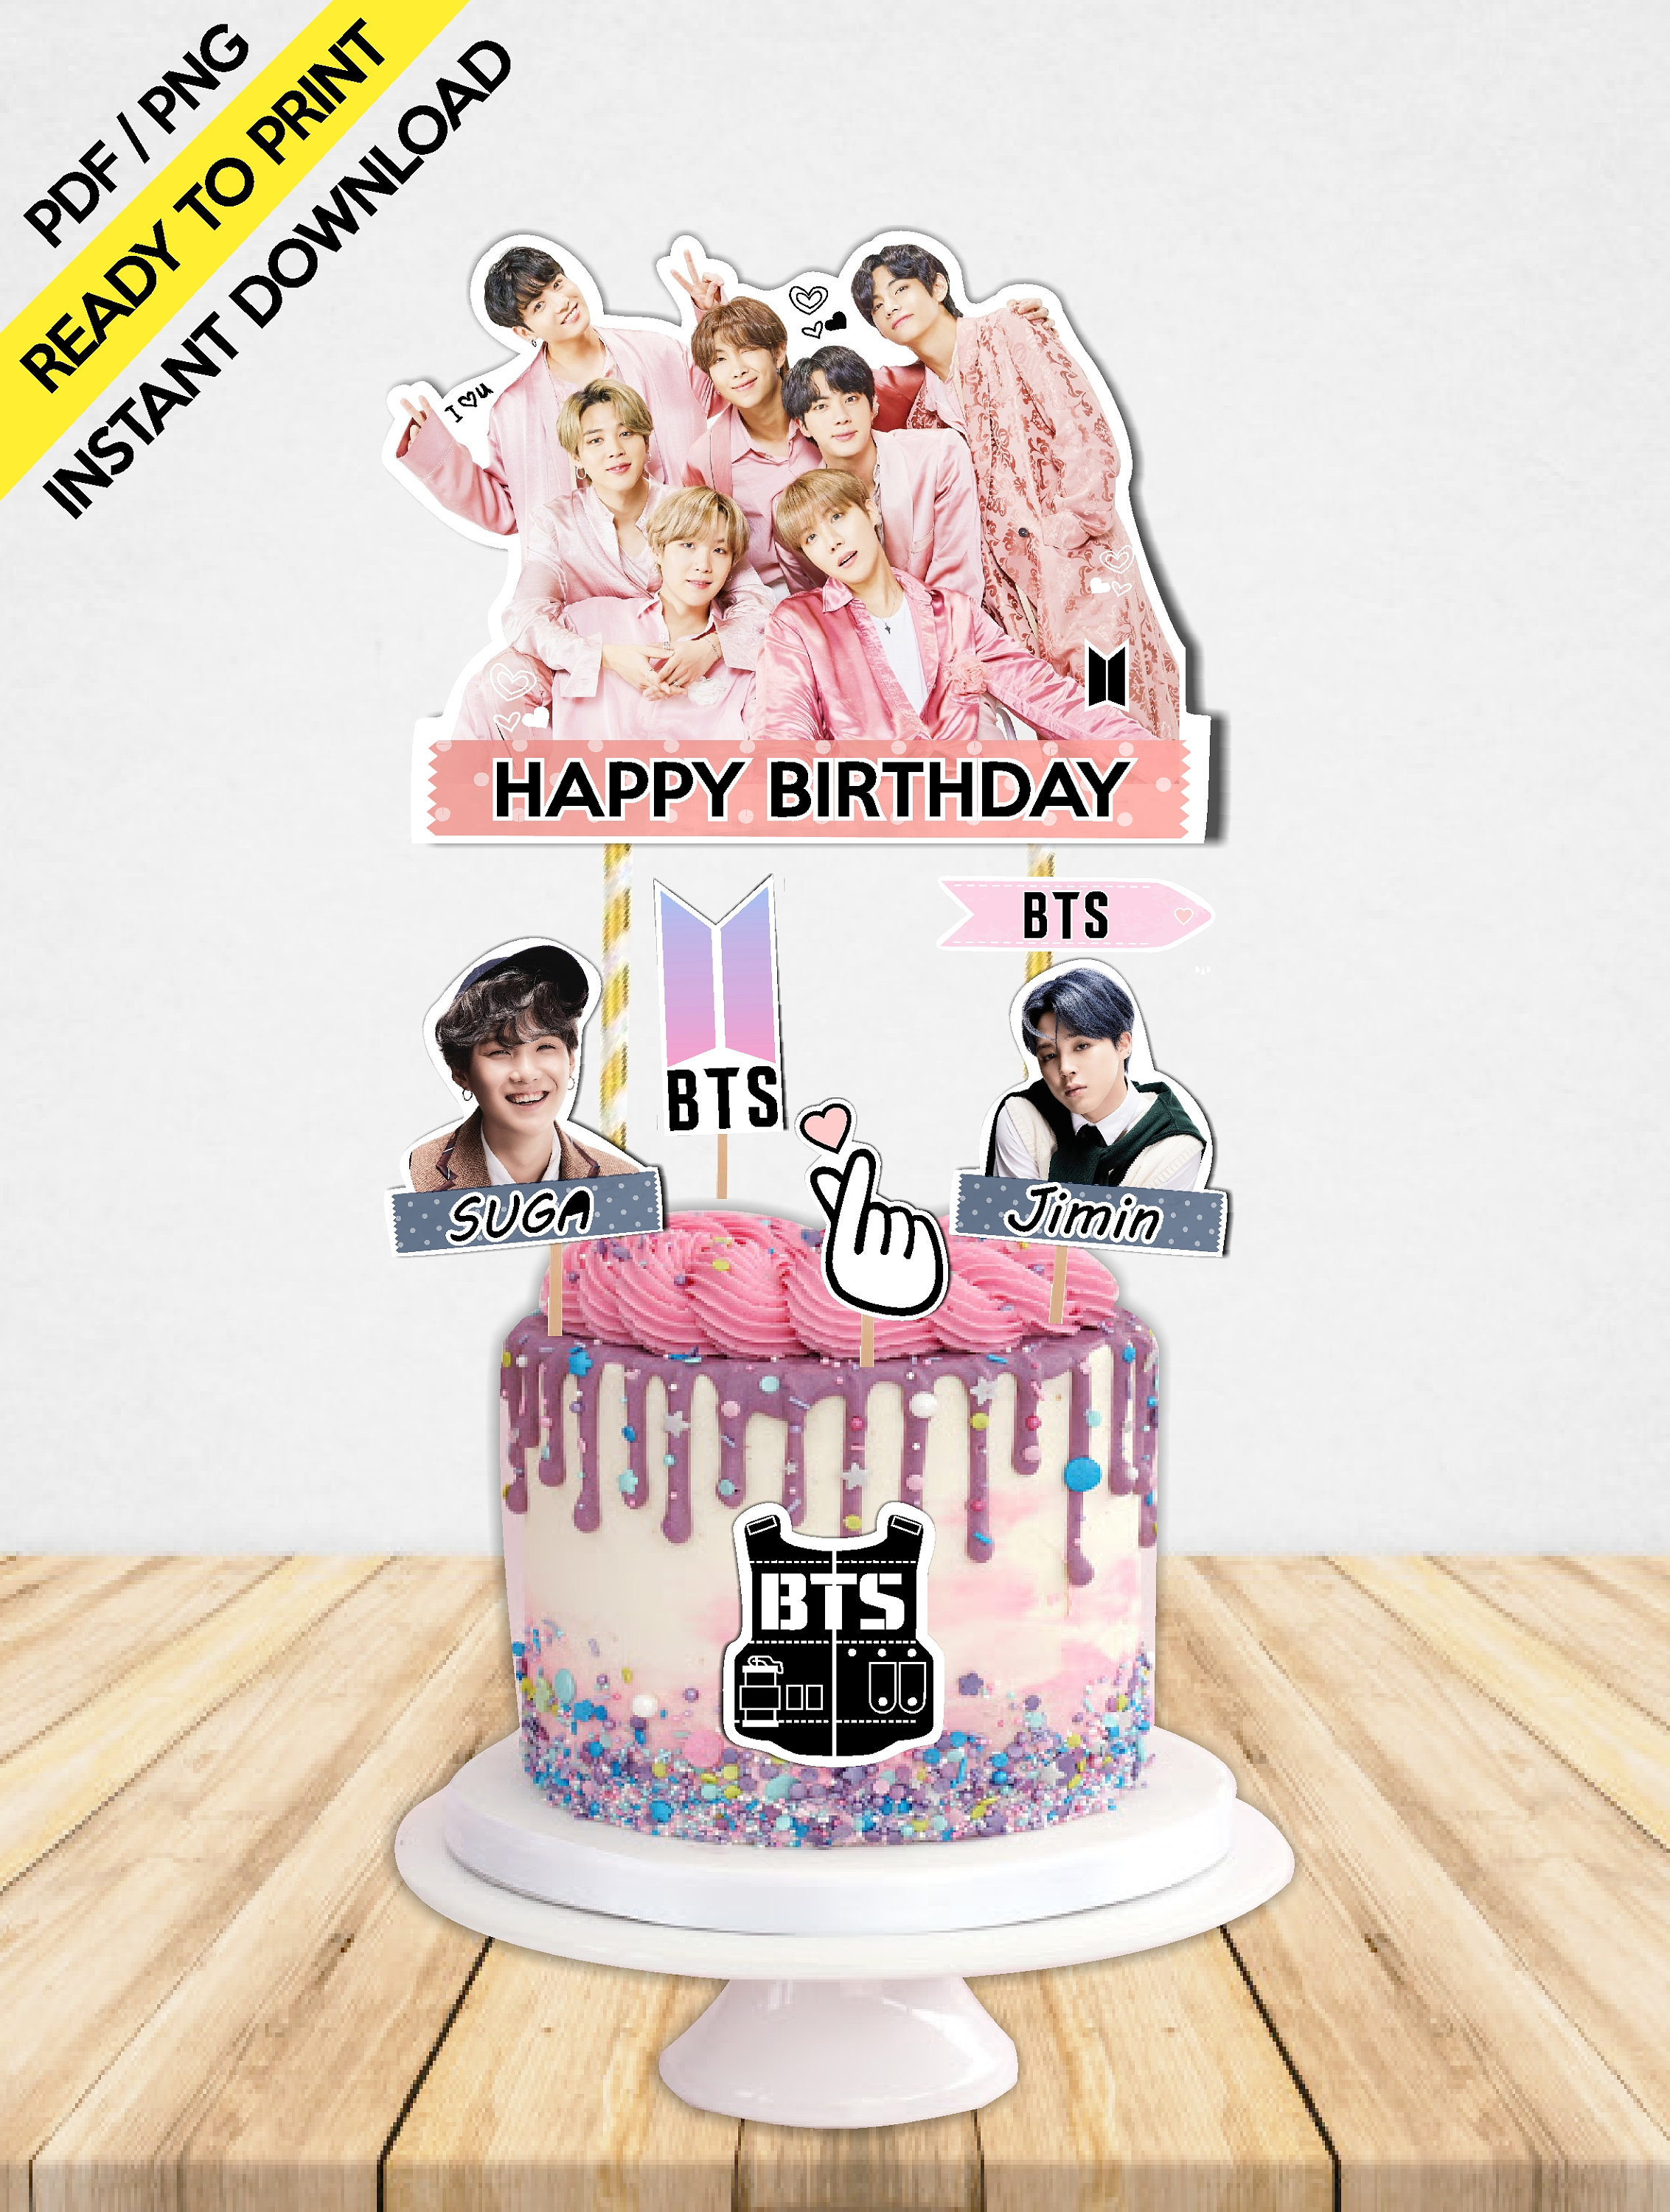 Bts cake: HERE Discover the most popular ideas ❤️